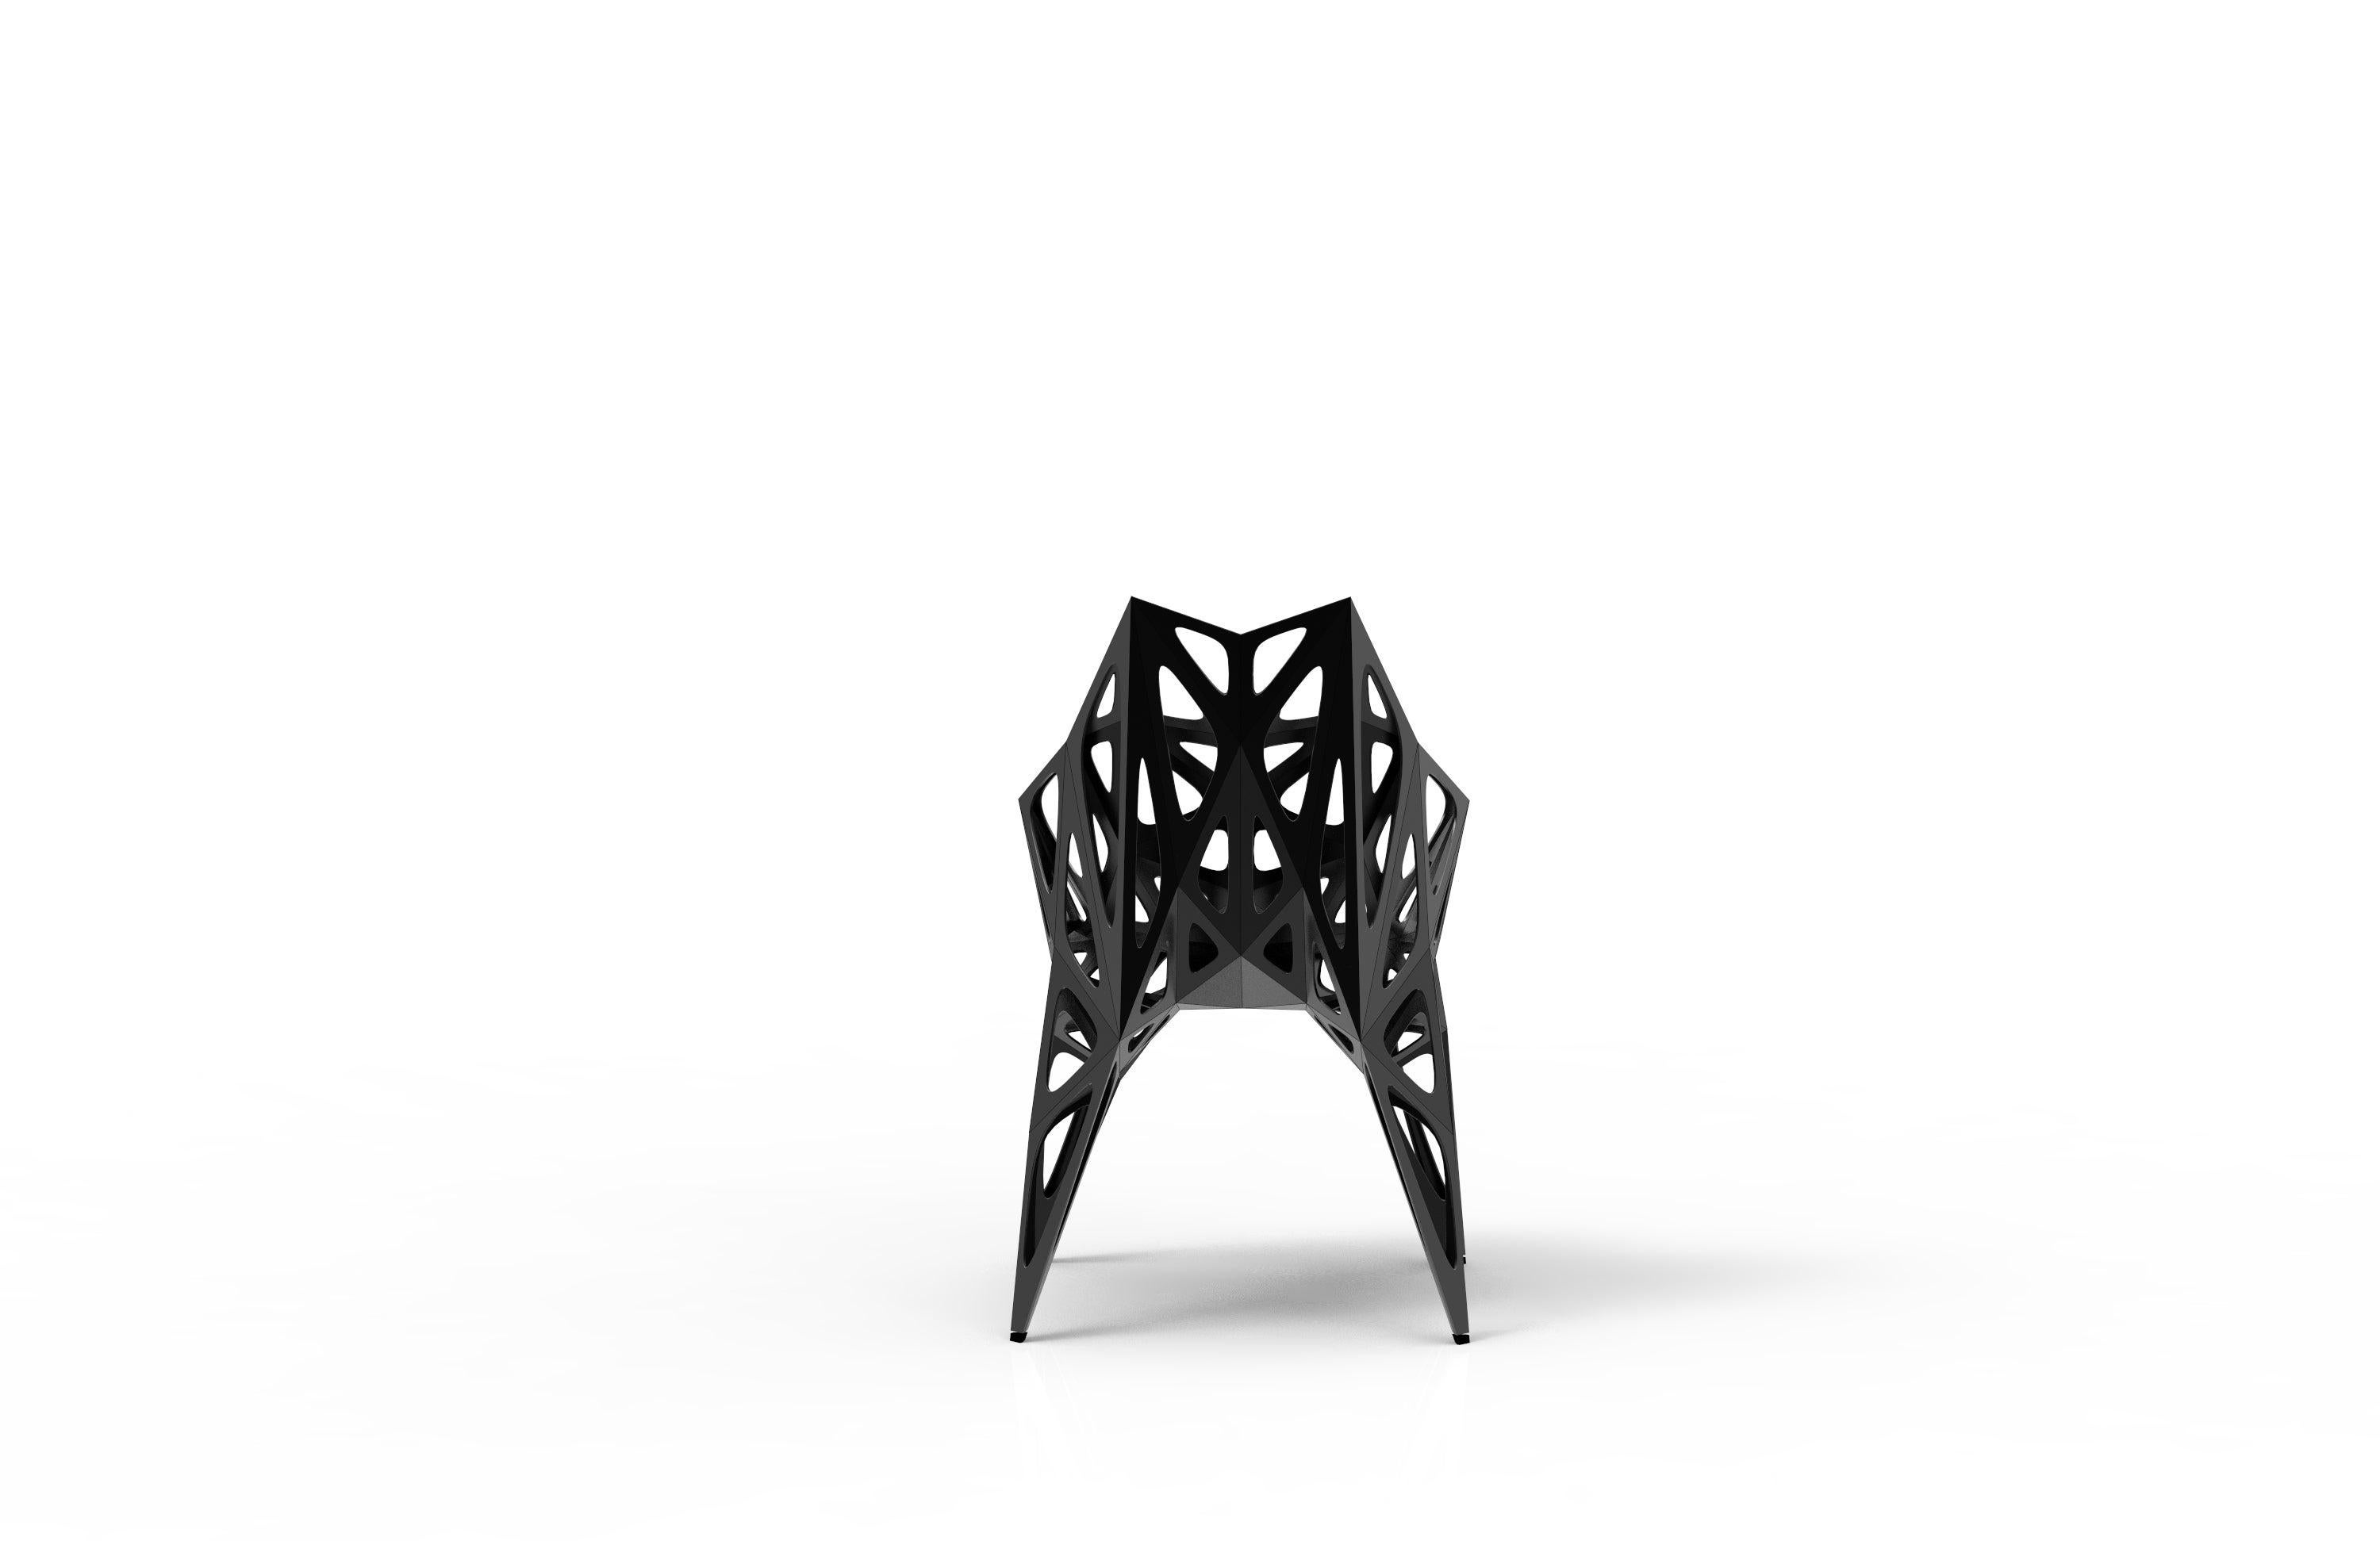 Powder-Coated Endless Form Chair by Zhoujie Zhang ‘MC011-F’ Matte Silver or Black For Sale